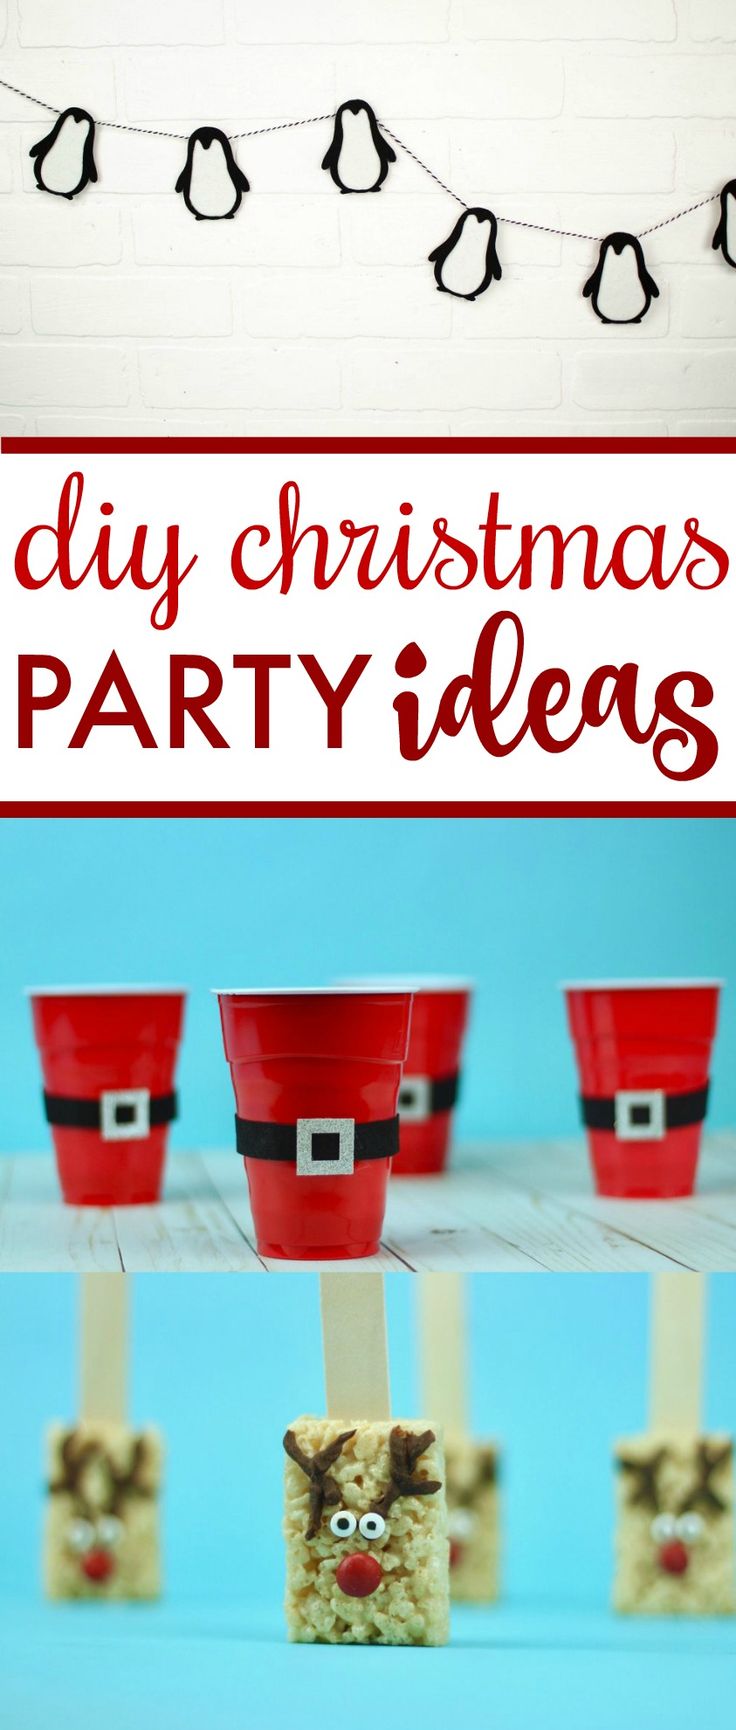 I hope you enjoy these cute DIY Christmas Party Ideas. I can’t wait to make th...